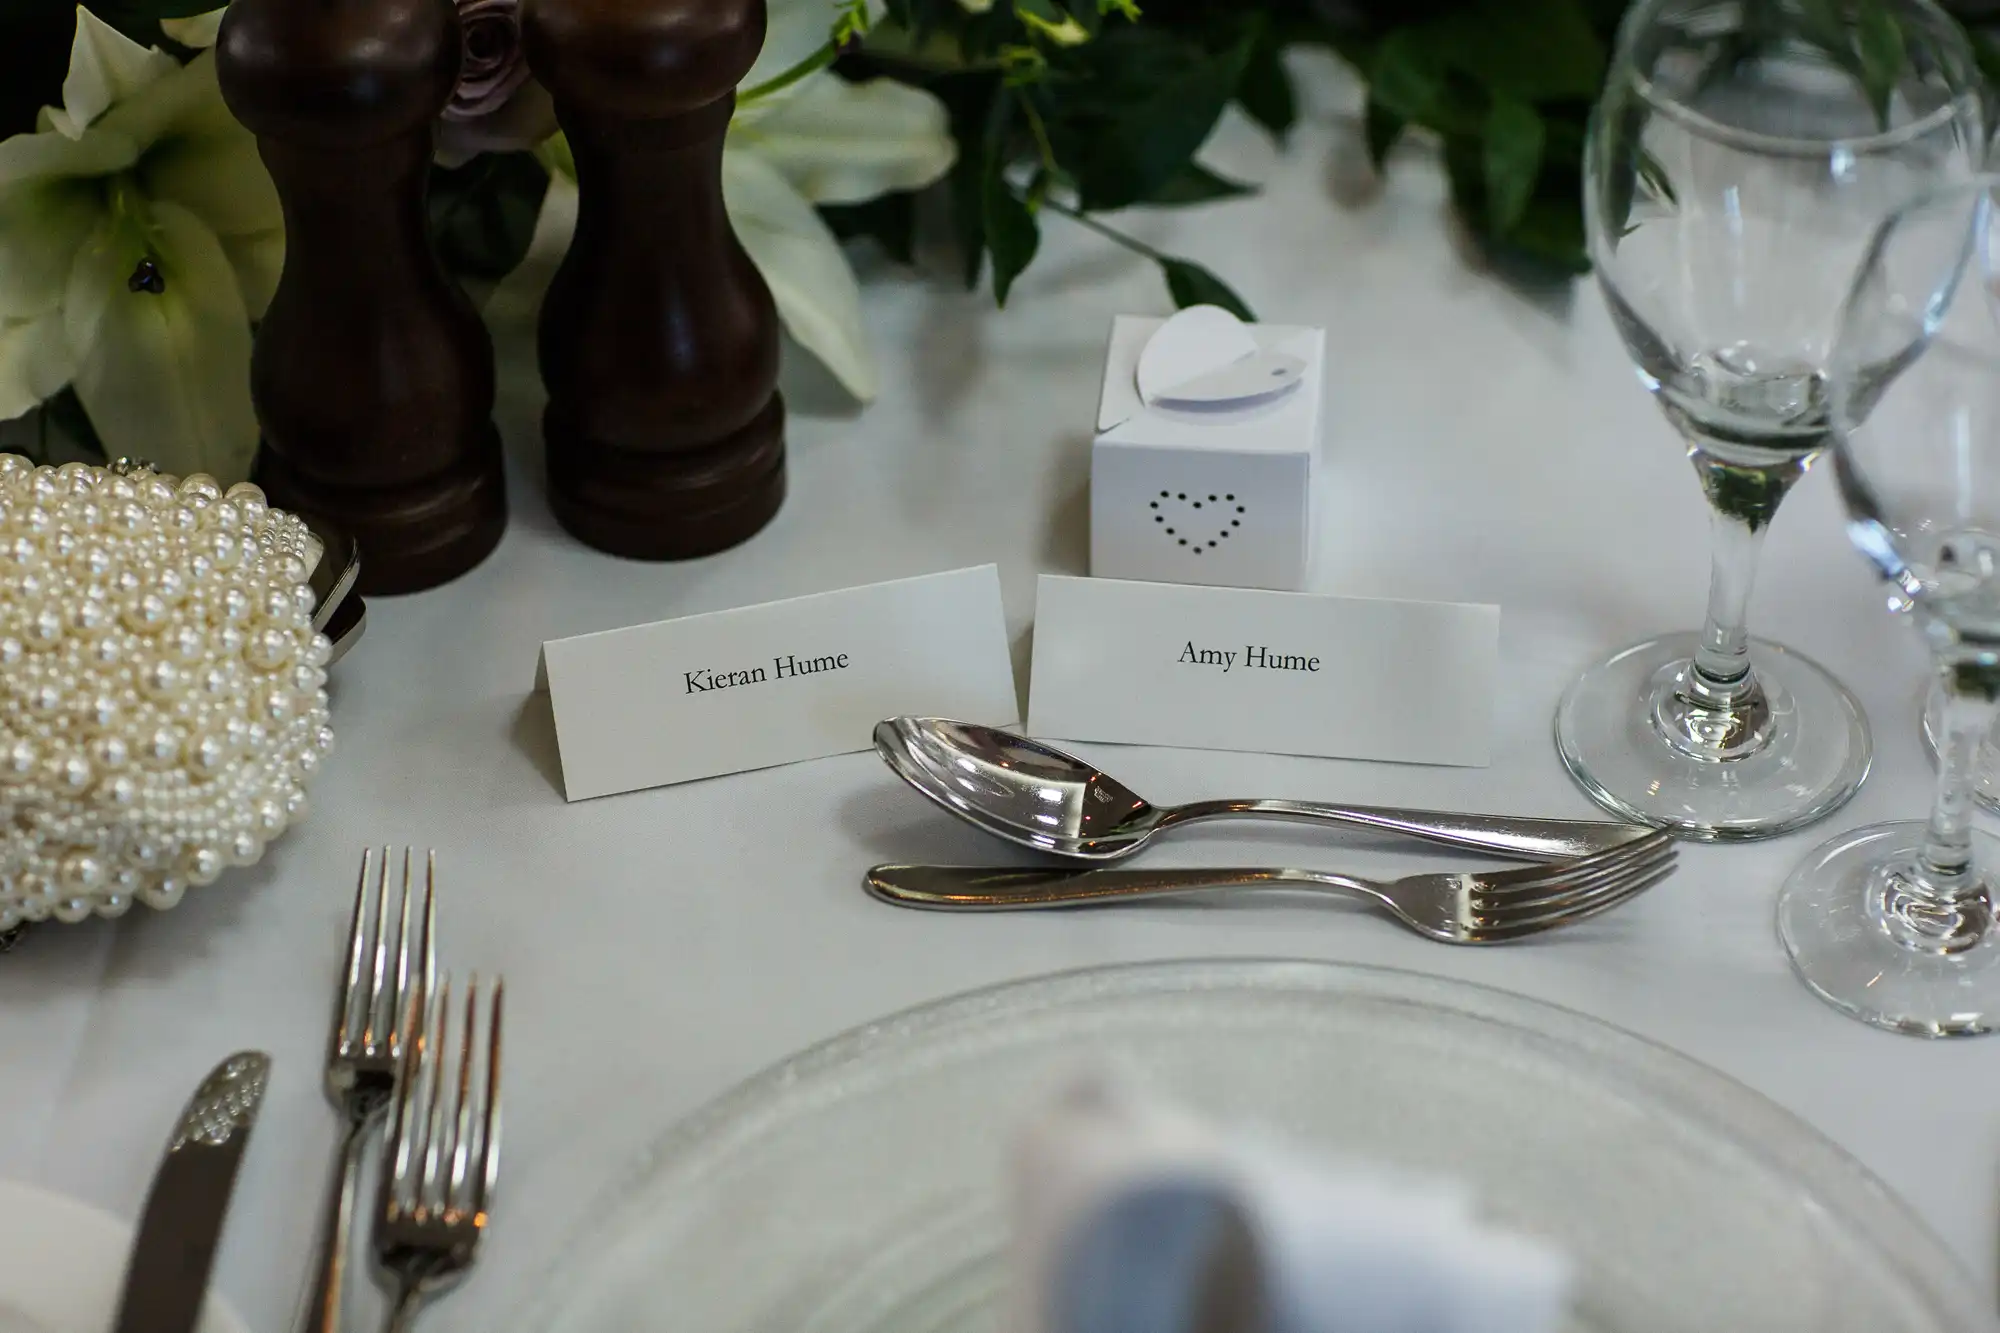 Elegant wedding table setting with name cards, pearl necklace, silver cutlery, and ivy decoration on a white tablecloth.